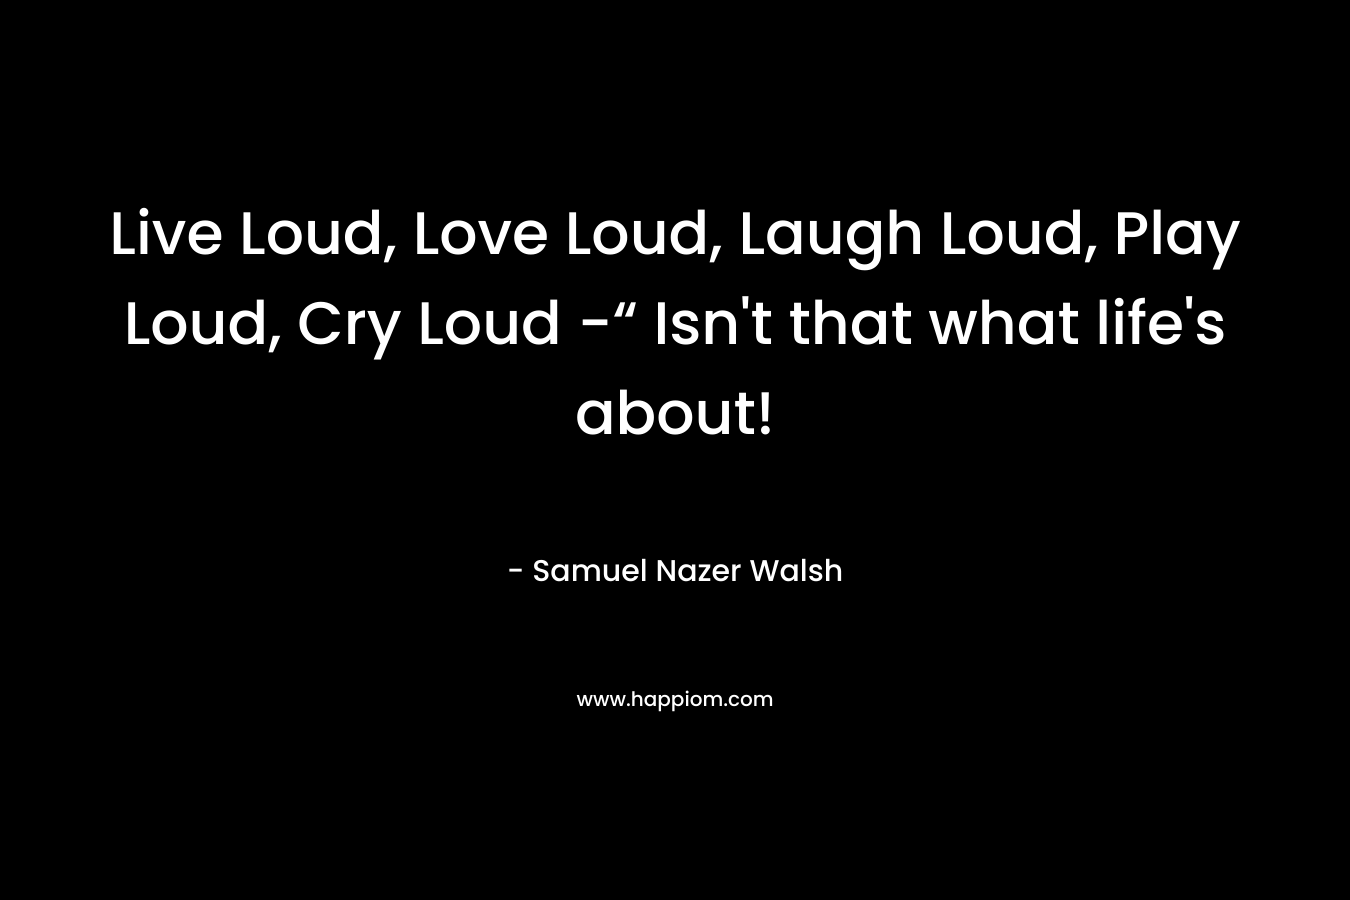 Live Loud, Love Loud, Laugh Loud, Play Loud, Cry Loud -“ Isn't that what life's about!